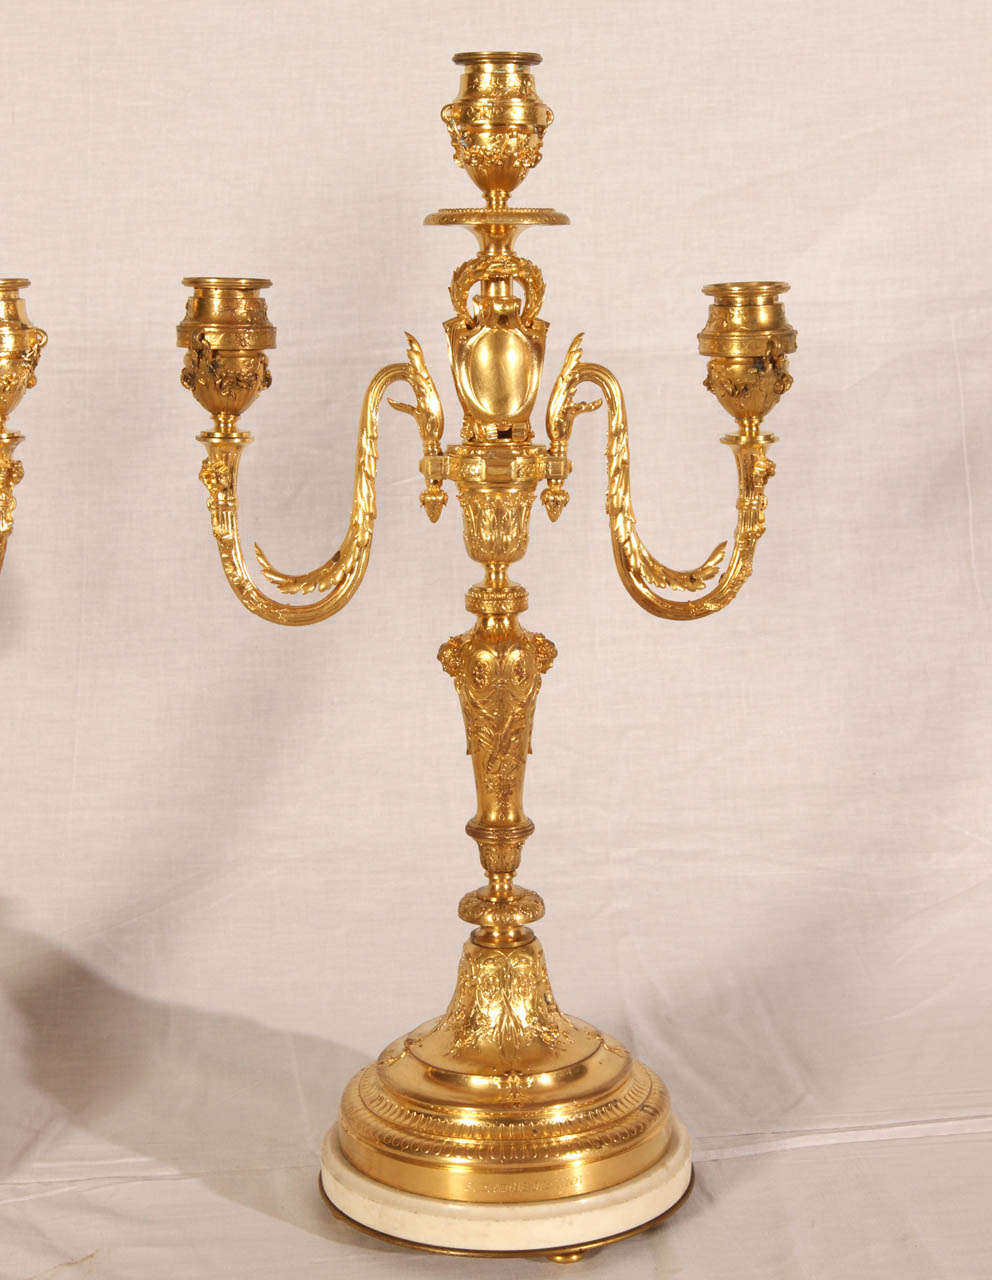 Gilt Pair of Napoleon III Period Candelabras For Sale